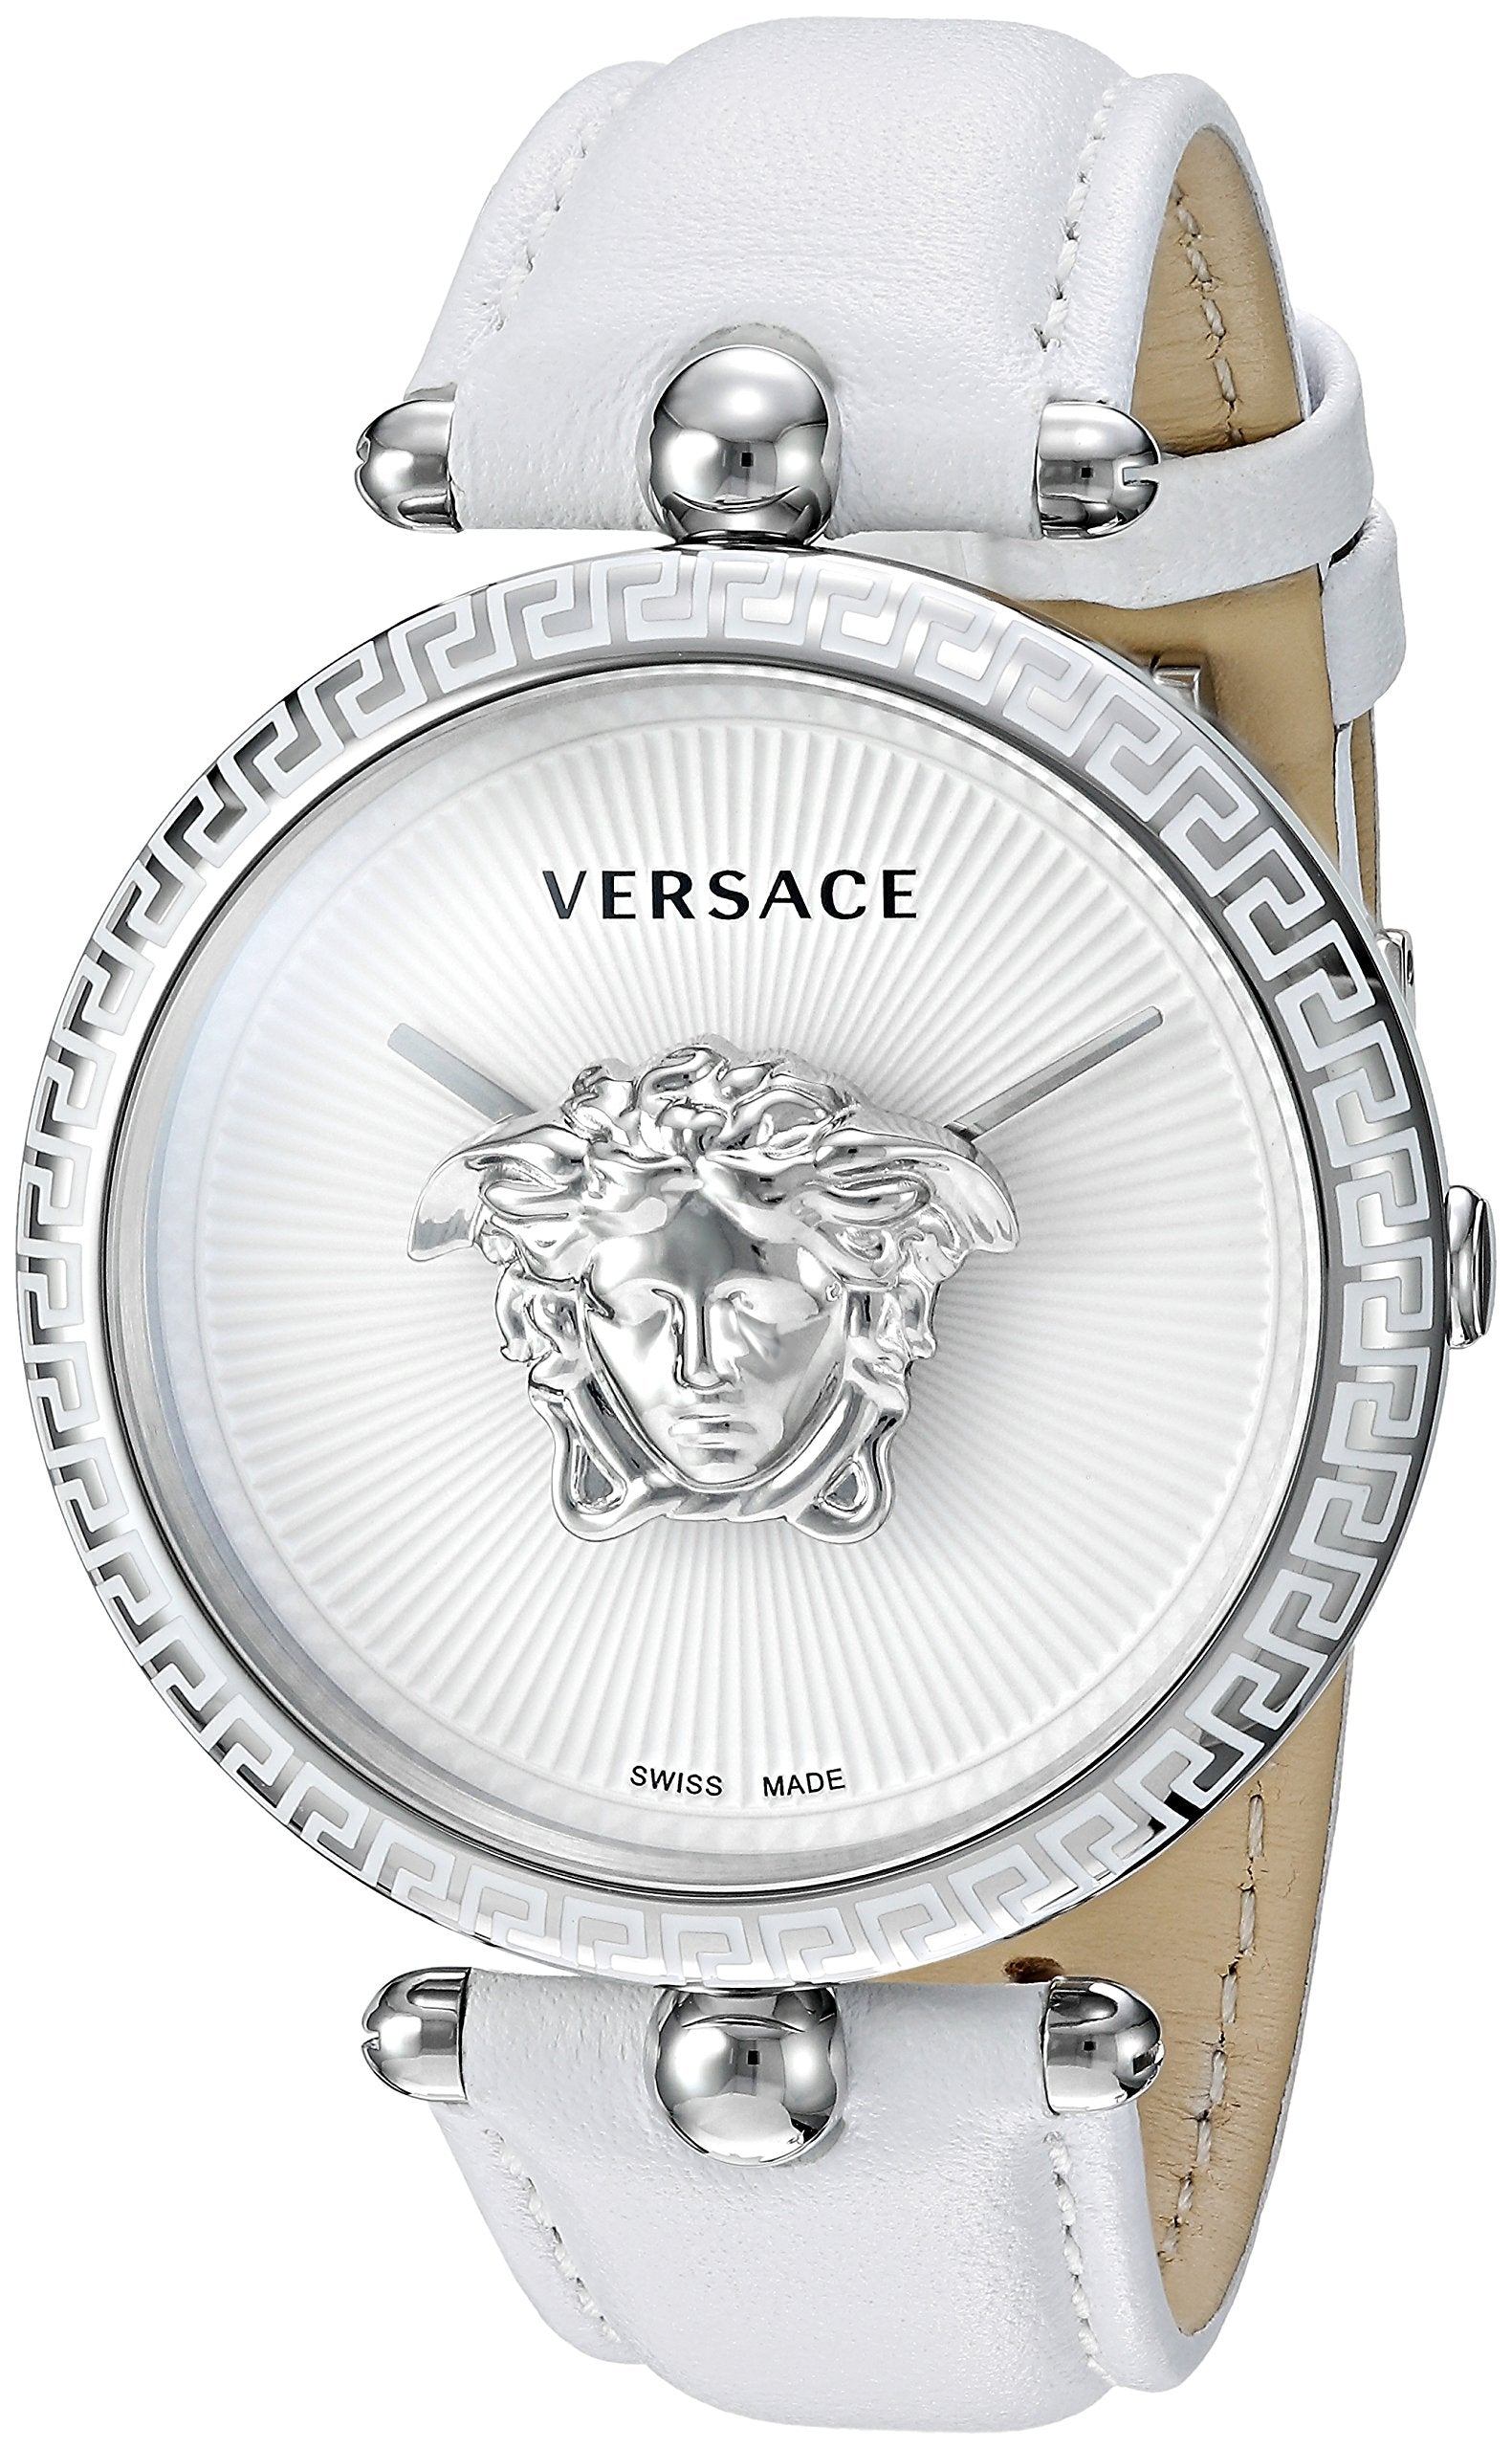 Versace Palazzo Empire White Dial White Leather Strap Watch for Women - VCO010017